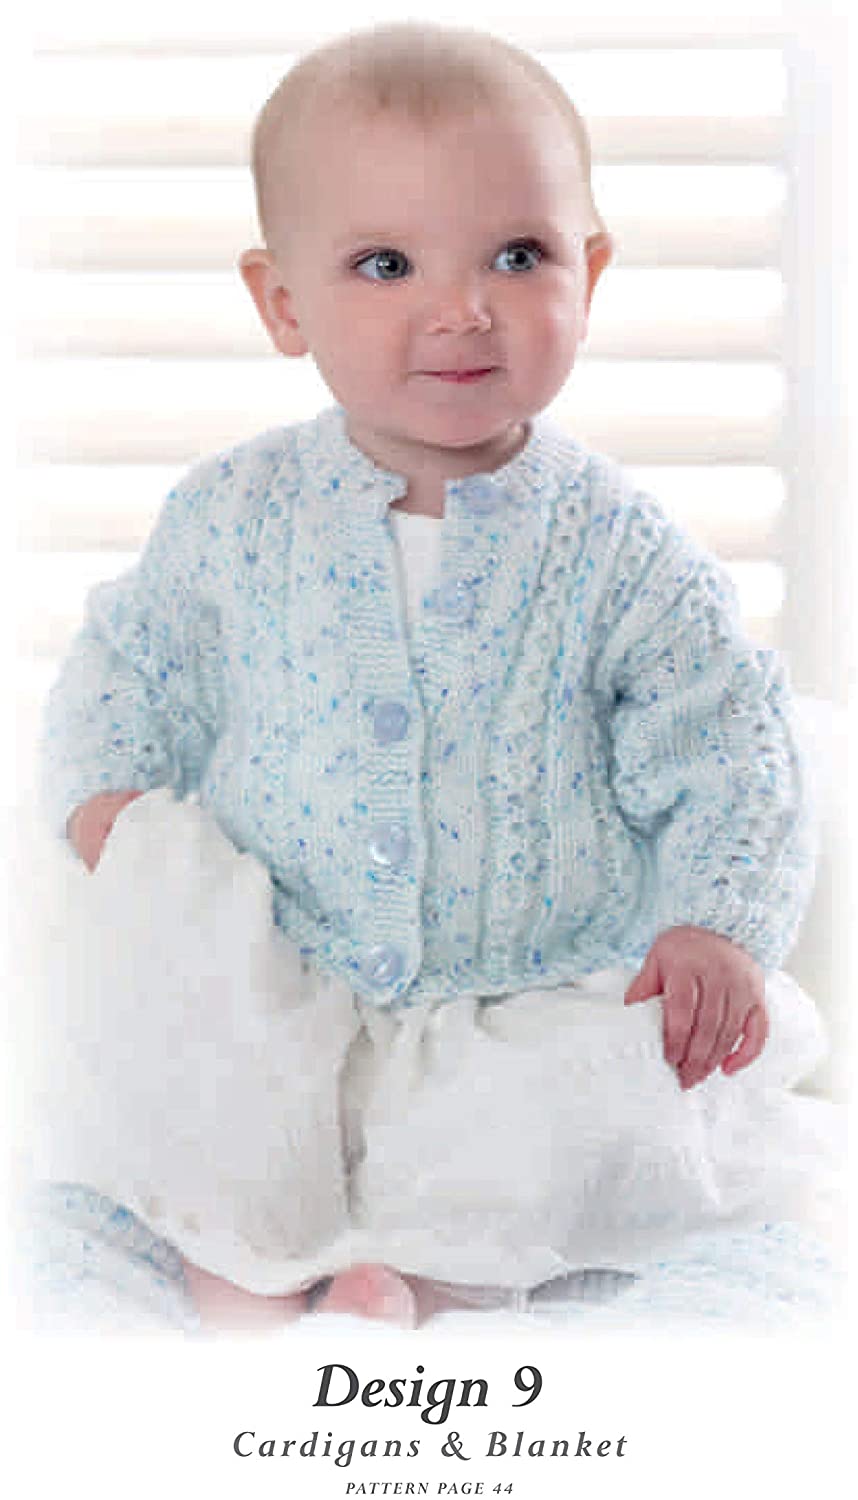 King Cole Baby Knits Book 2 DK Knitting Patterns